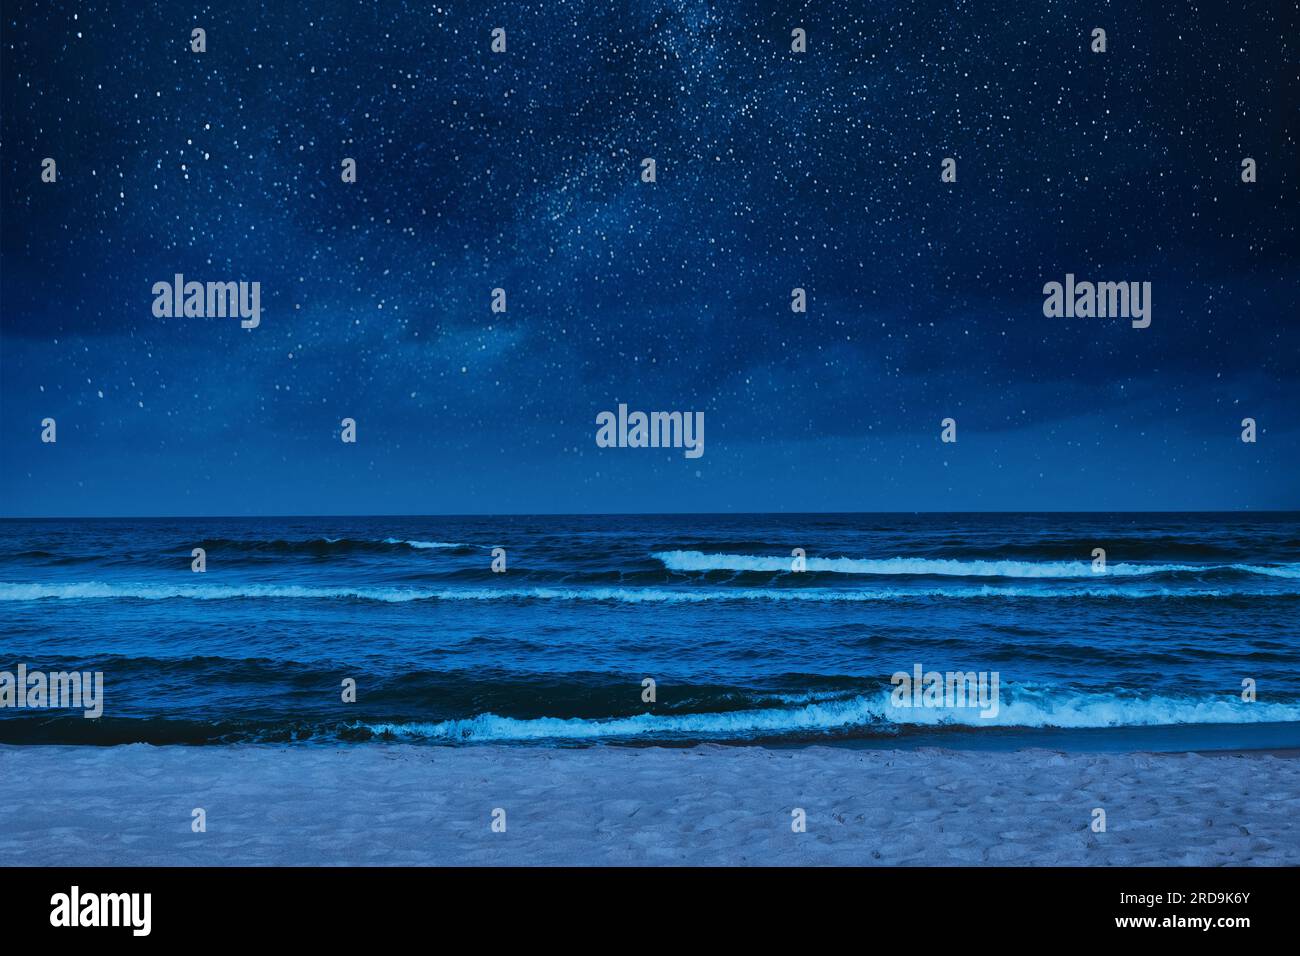 Sea waves rolling onto sandy beach under starry sky at night Stock Photo